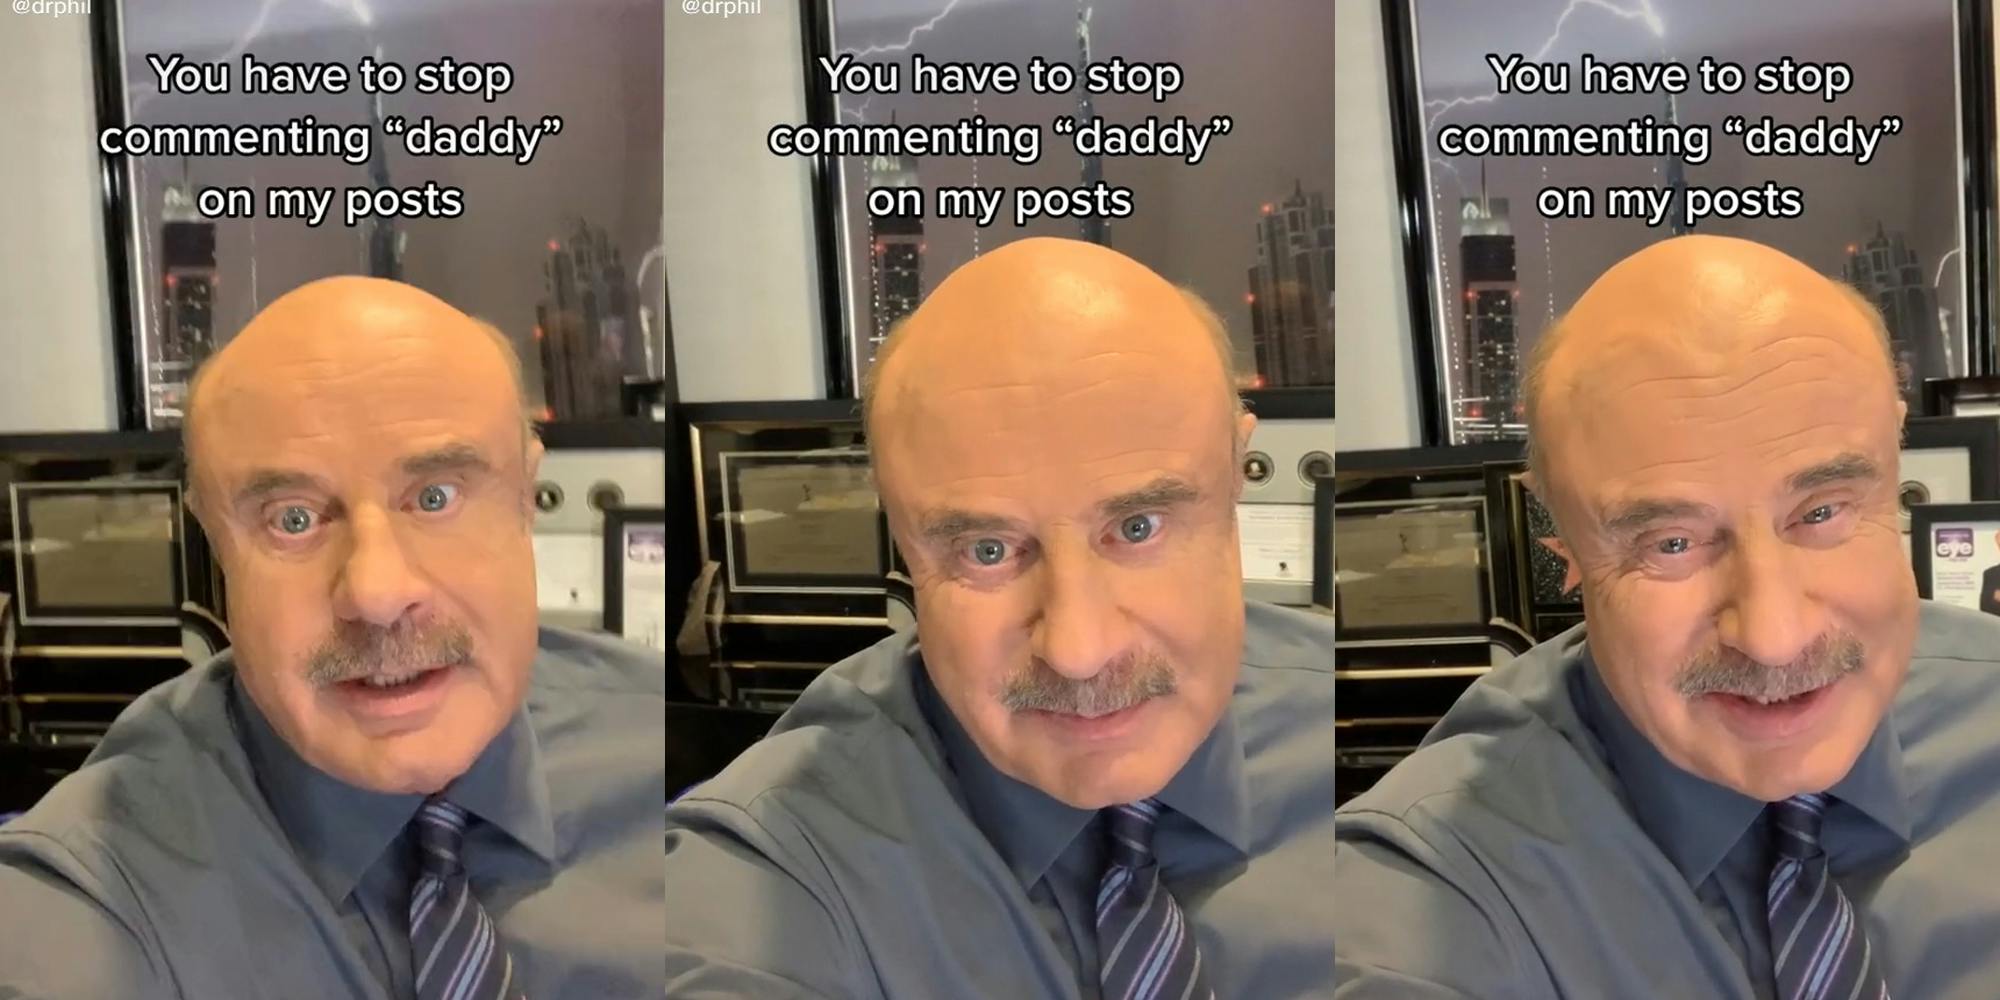 dr phil asking people to stop calling him "daddy"